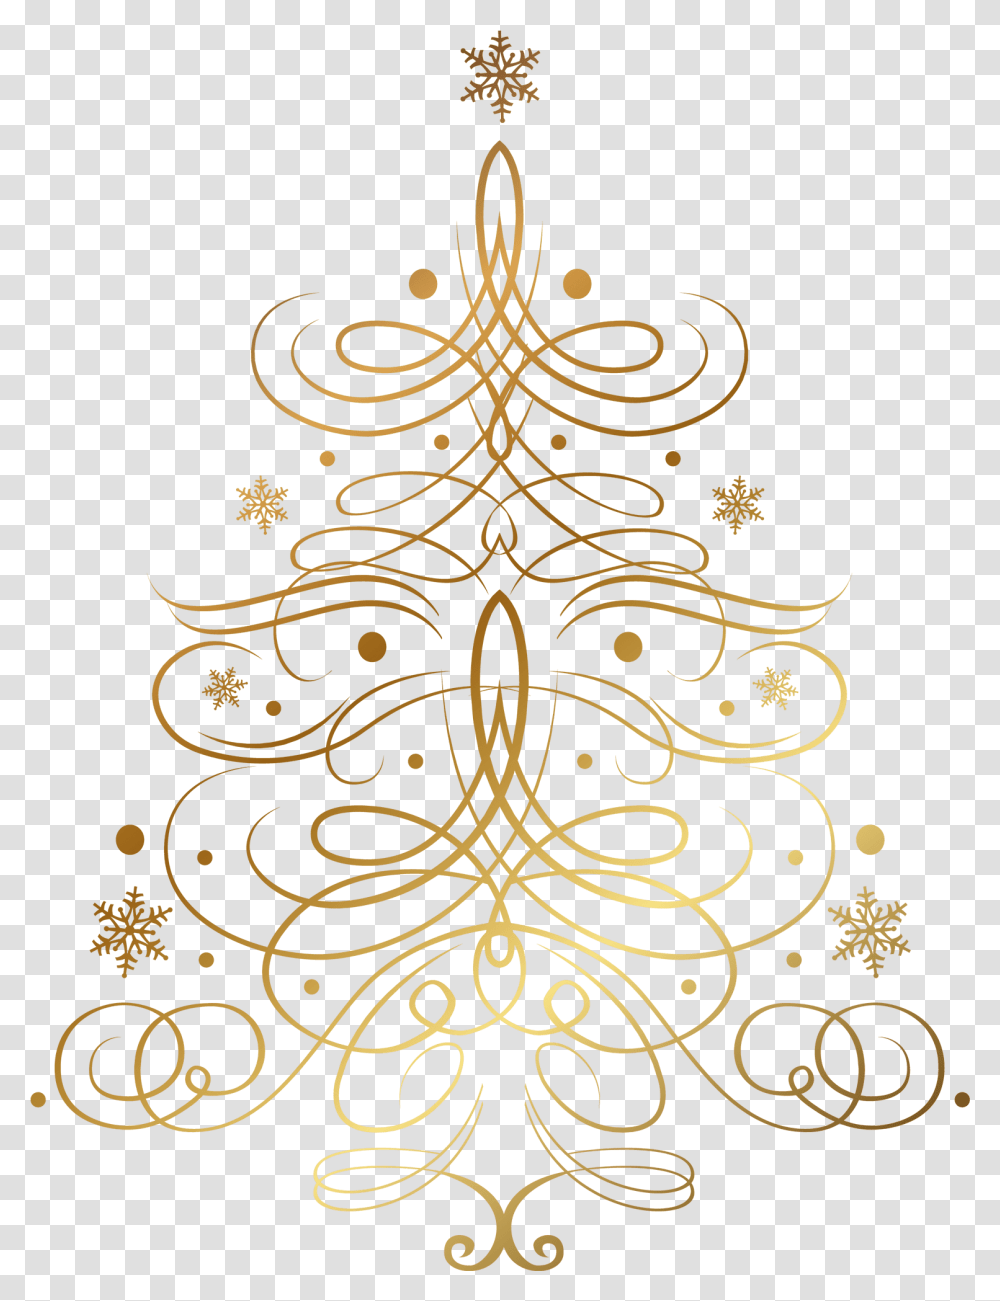 Free Christmas Graphics Commercial Use Vintage Images Christmas Tree Gold, Ornament, Floral Design, Pattern, Art Transparent Png